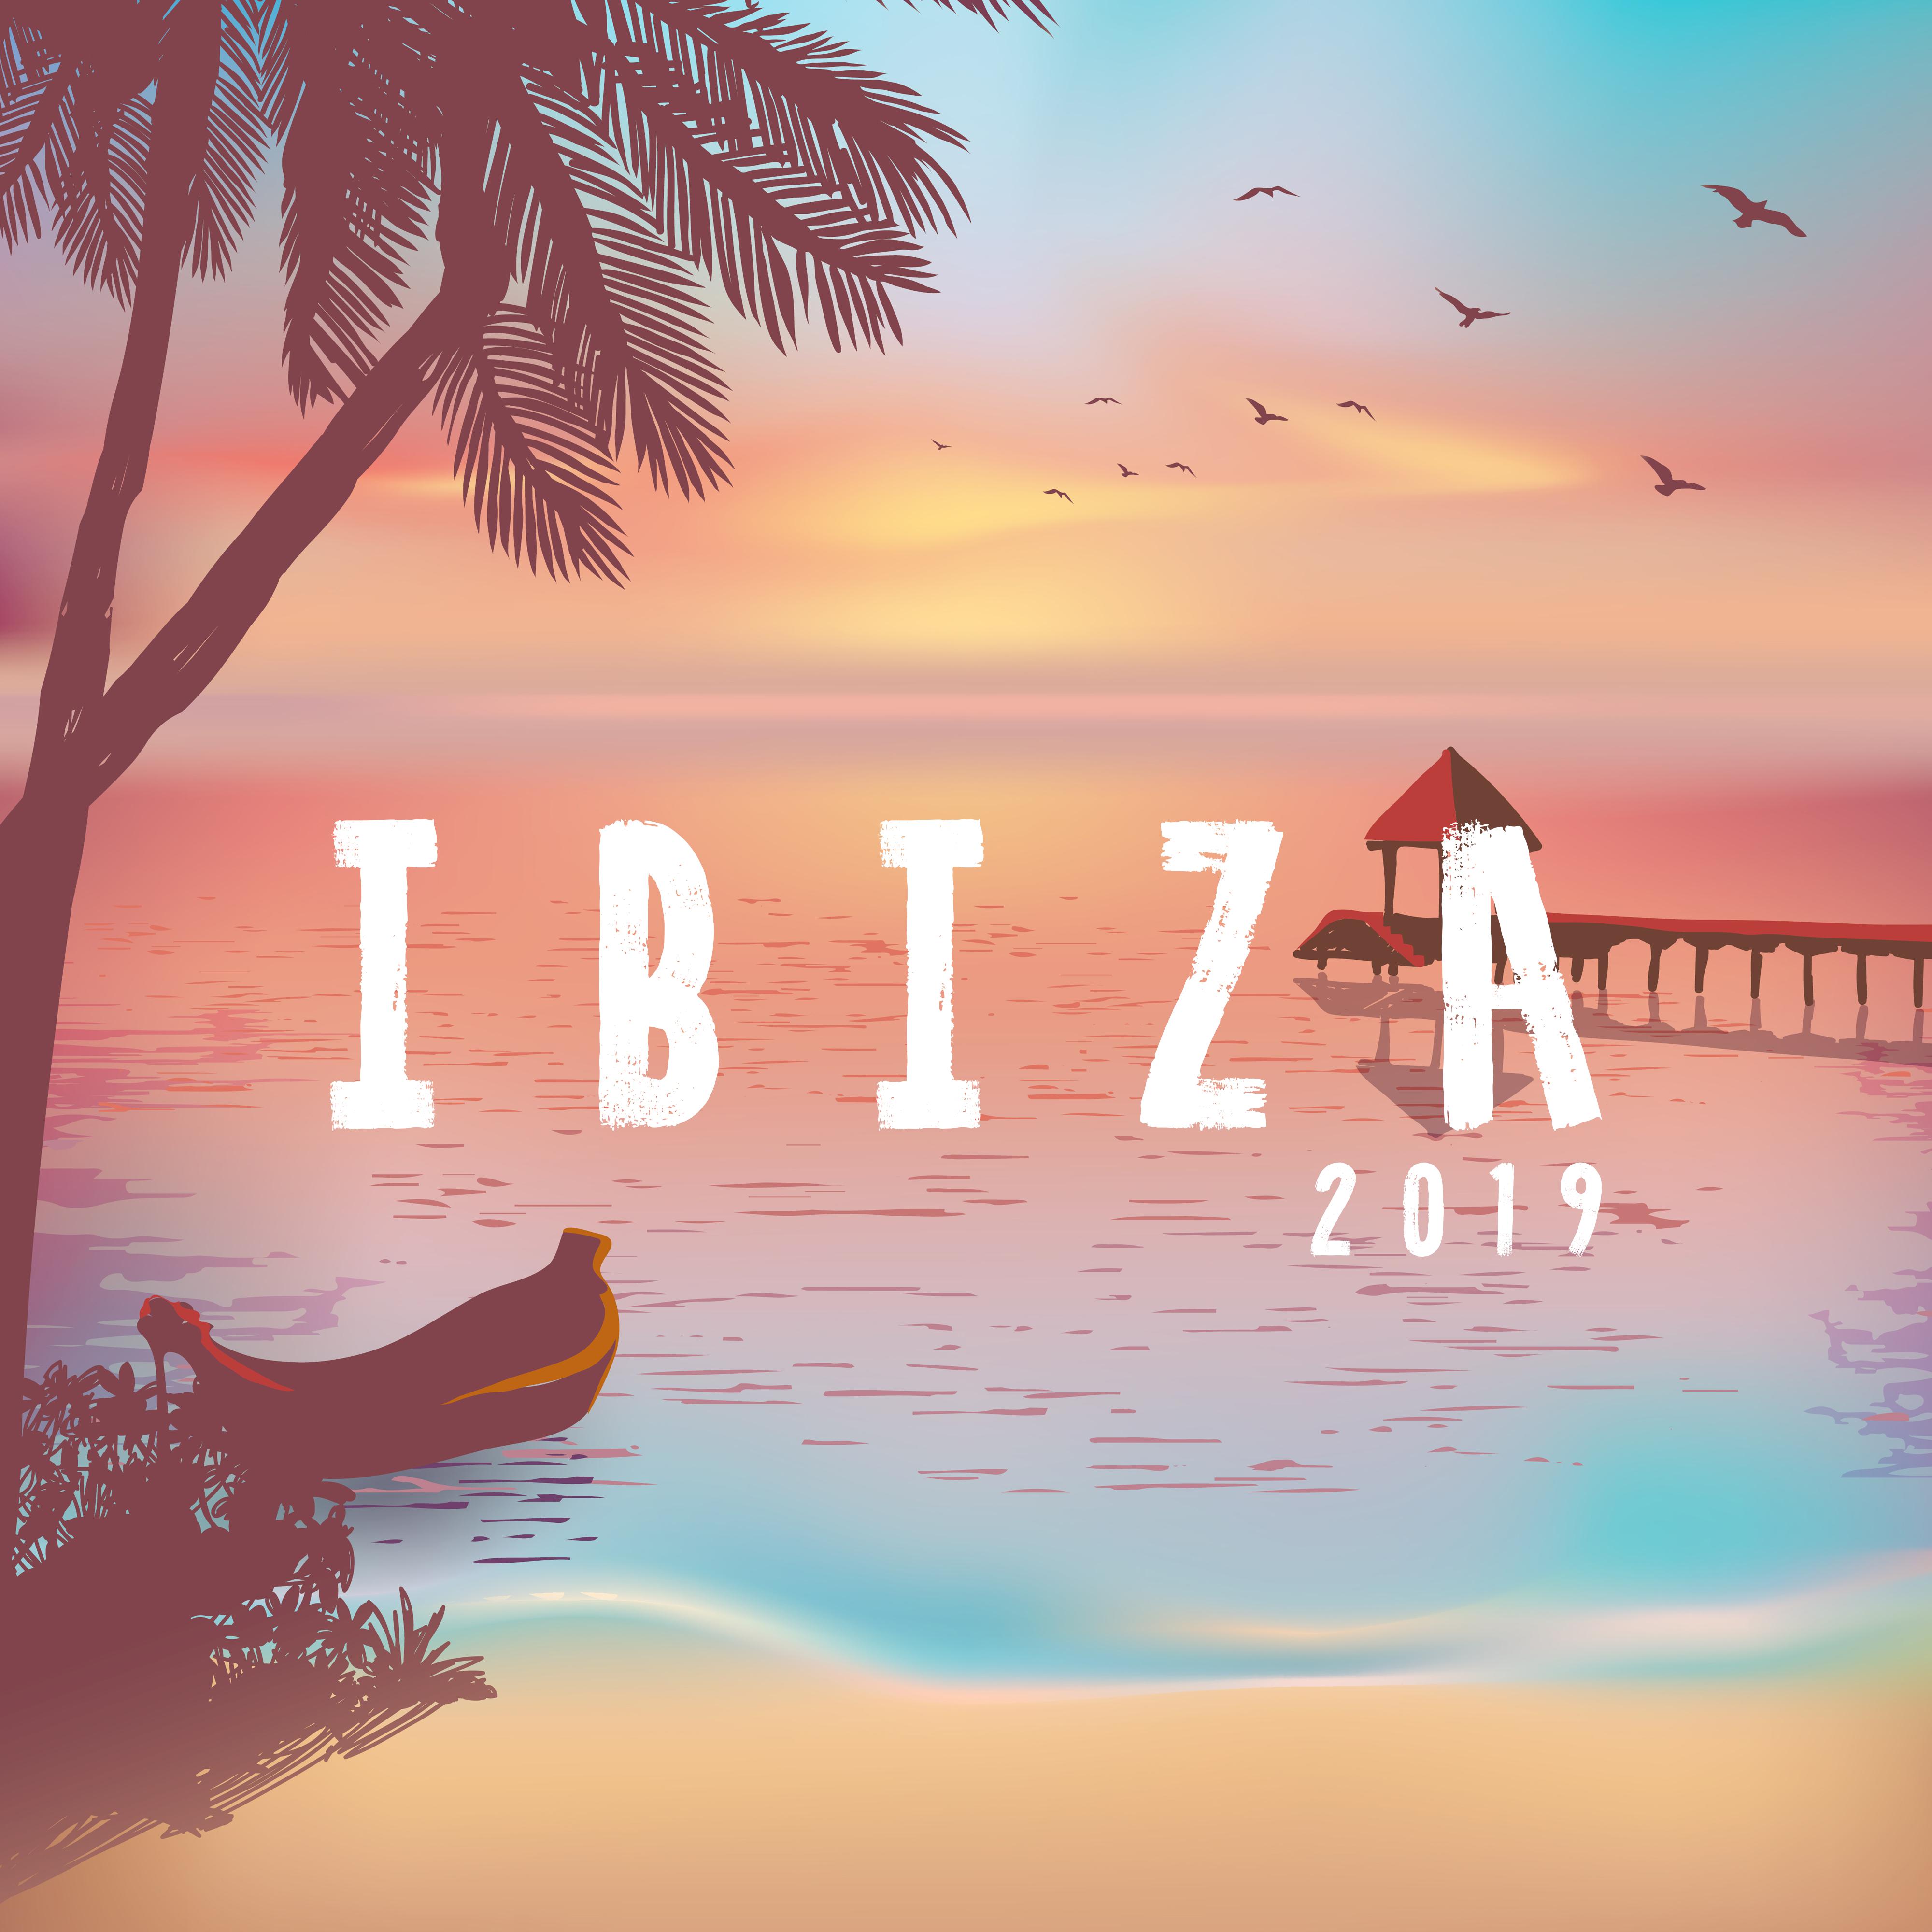 Ibiza 2019: Chill Out Music, Ibiza Party, Bar Chillout, Summer Music 2019, Gentle Beach Melodies, Relax 2019, Summertime 2019